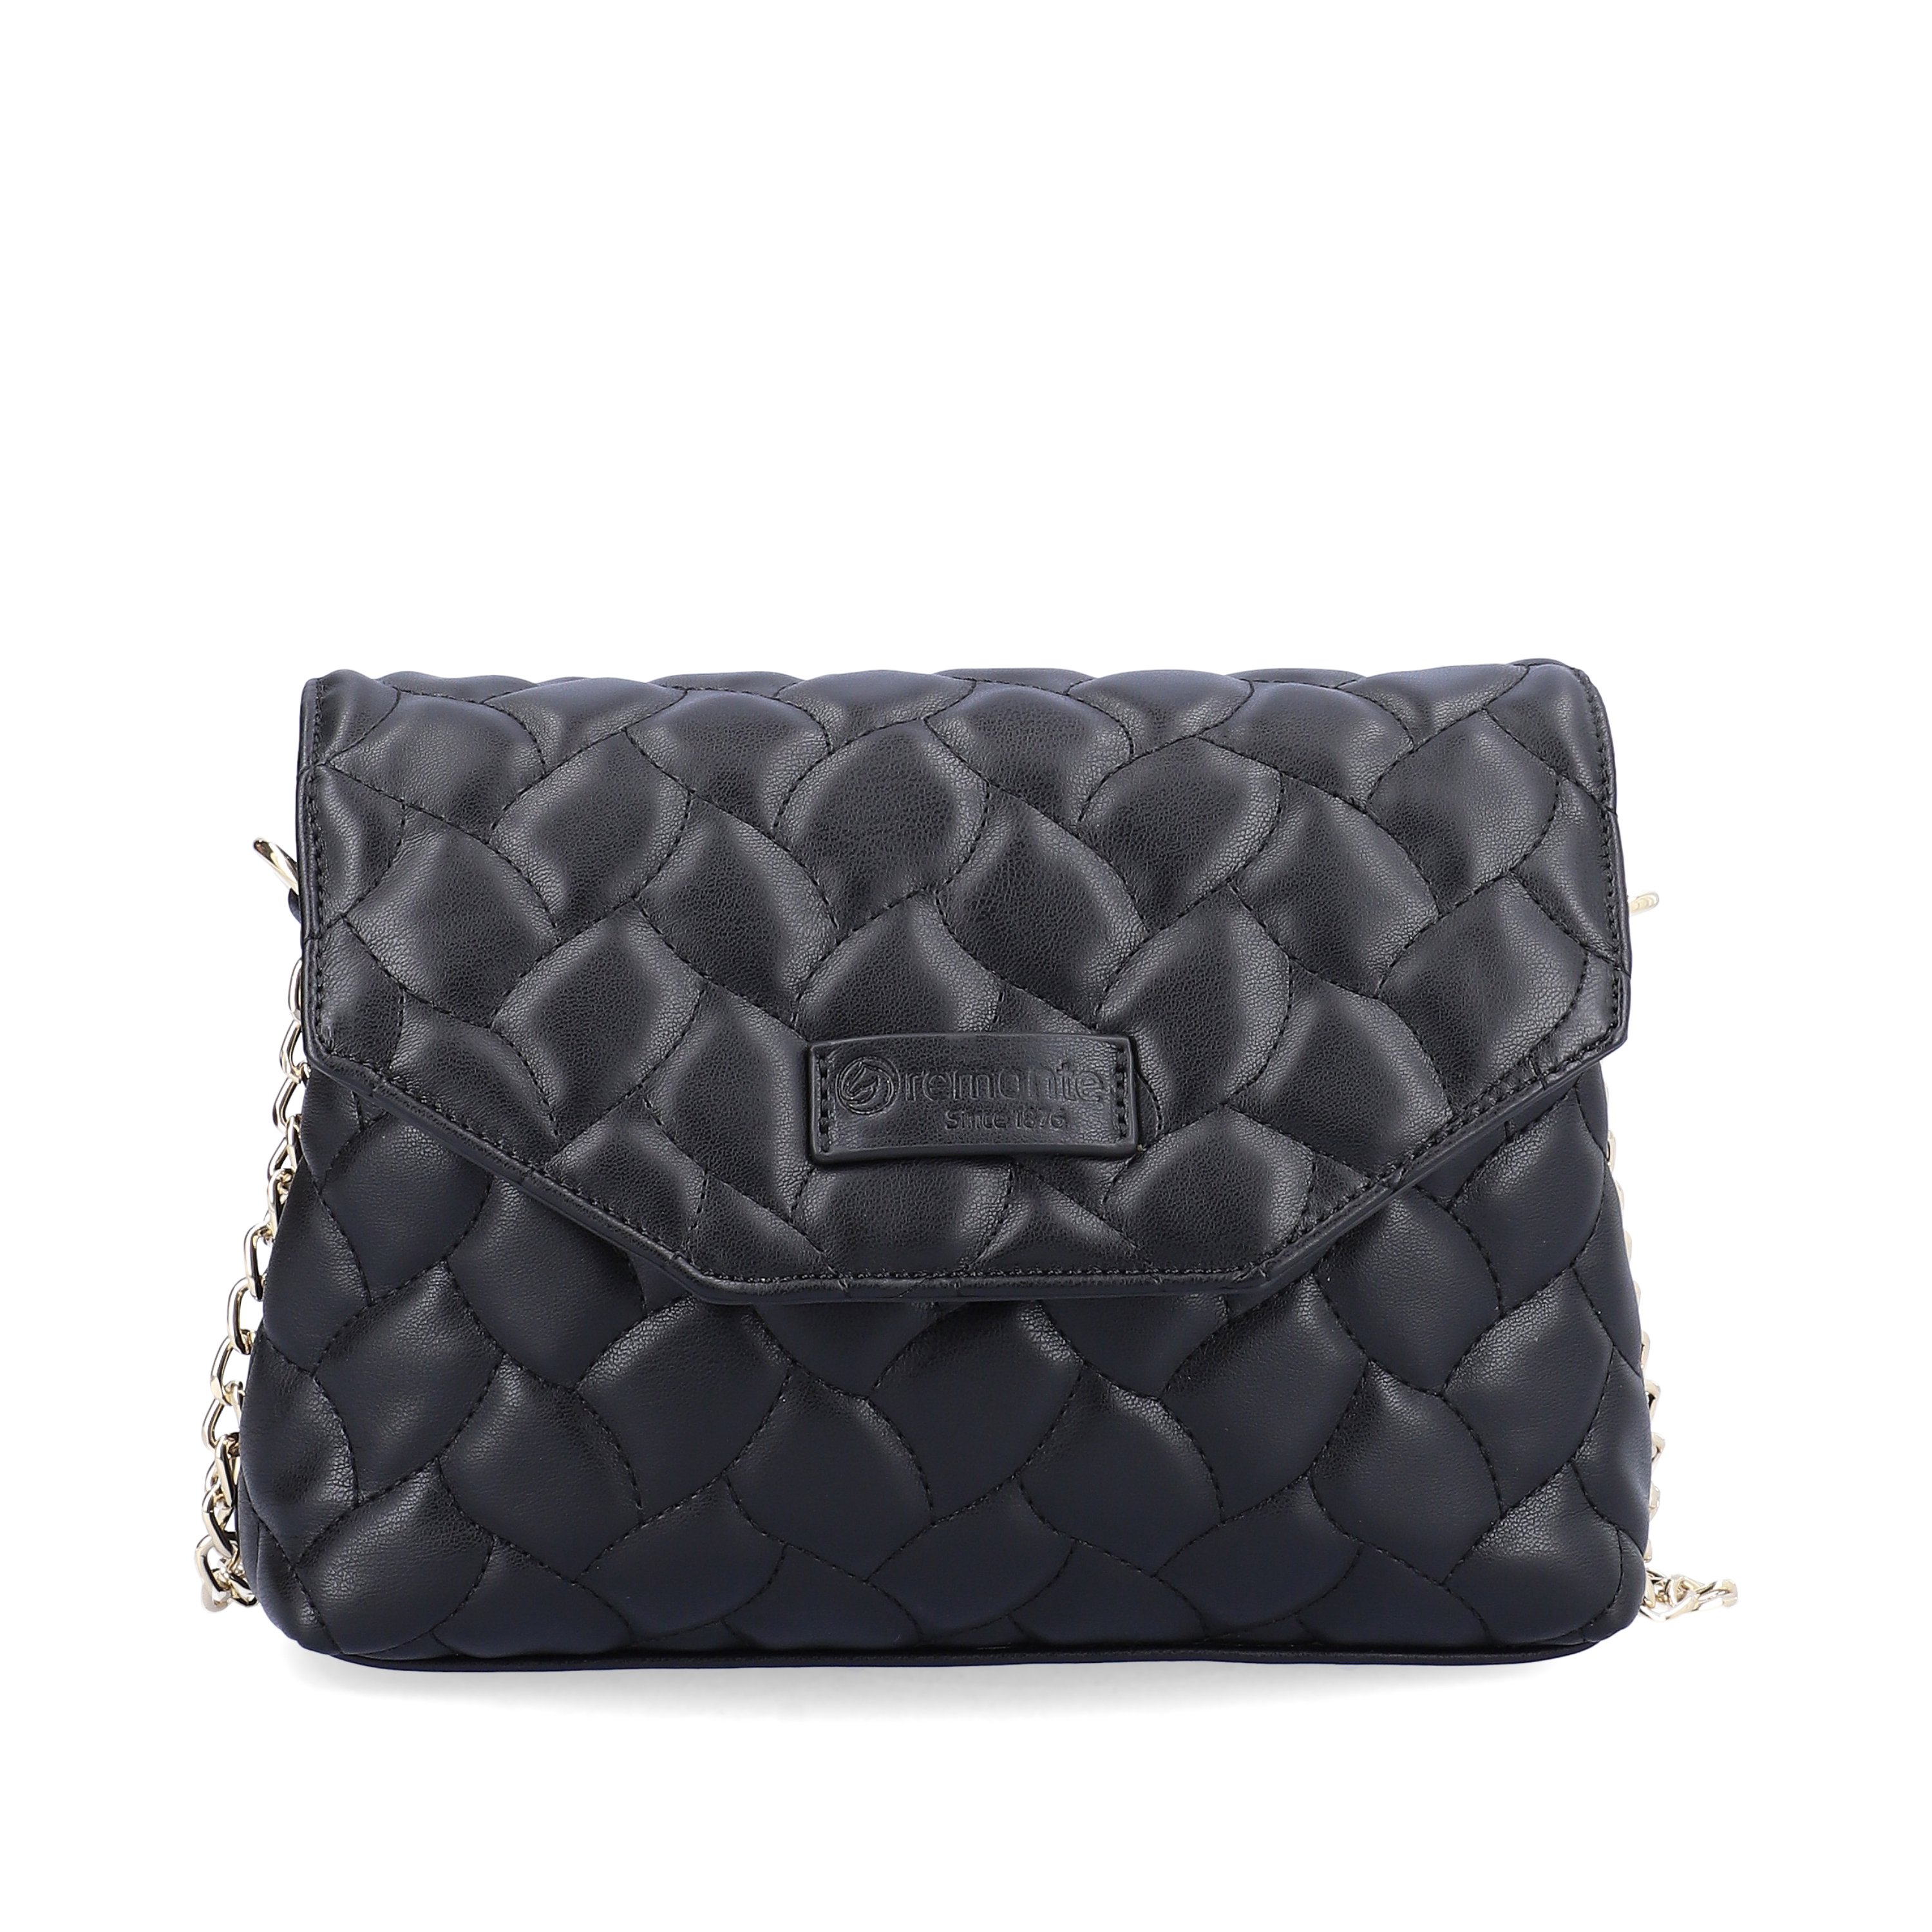 remonte women´s bag Q0627-00 in black made of imitation leather with flap with zipper from the front.